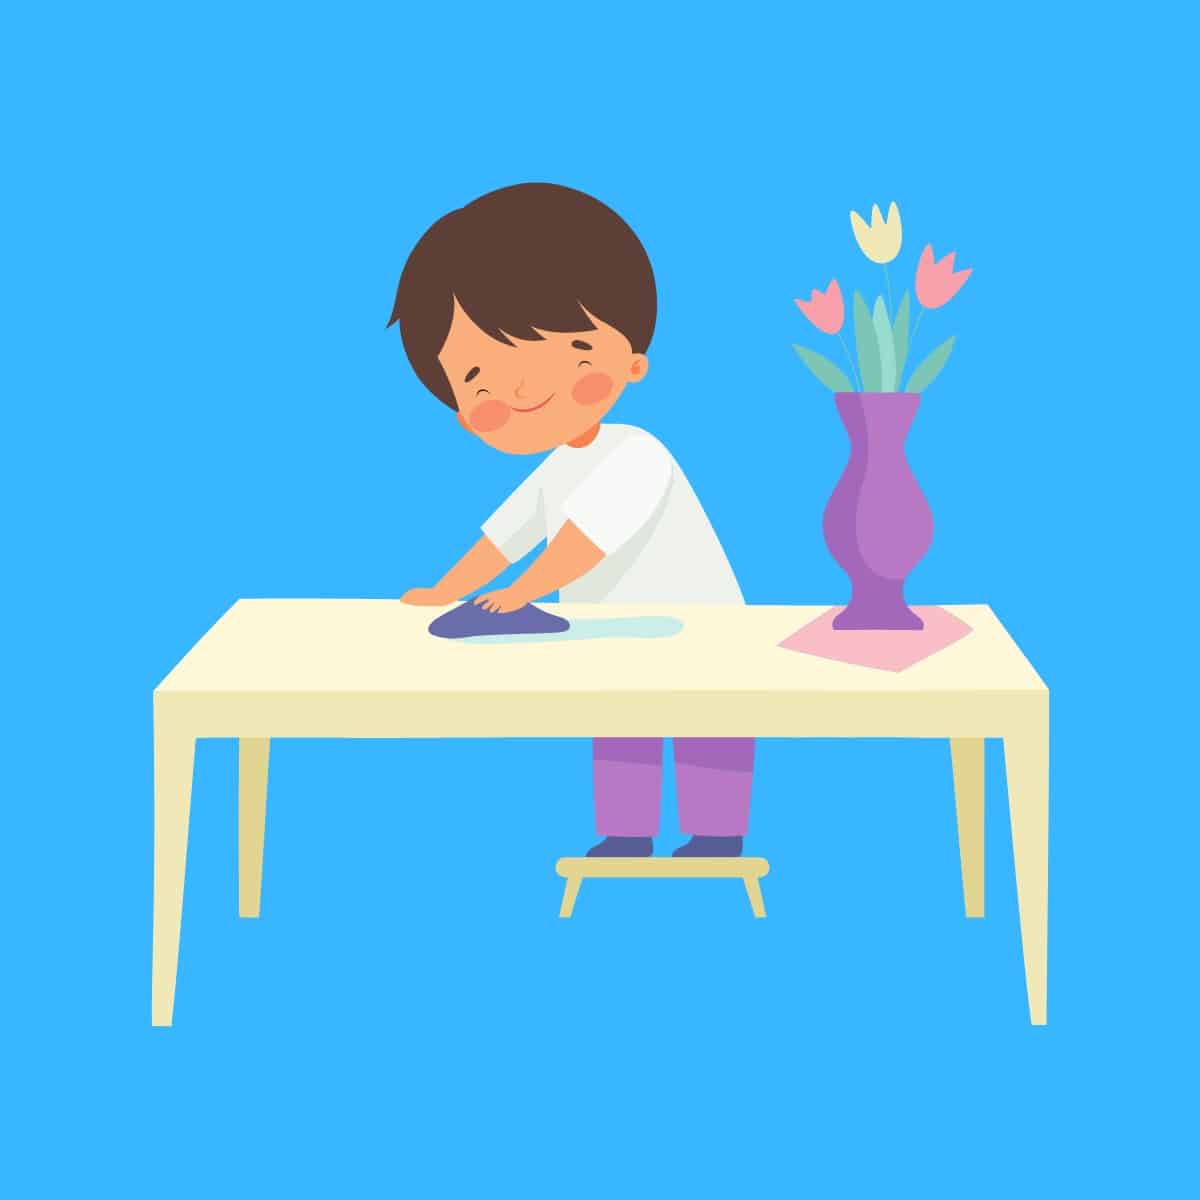 Cartoon graphic of a young boy wiping the table clean on a blue background.